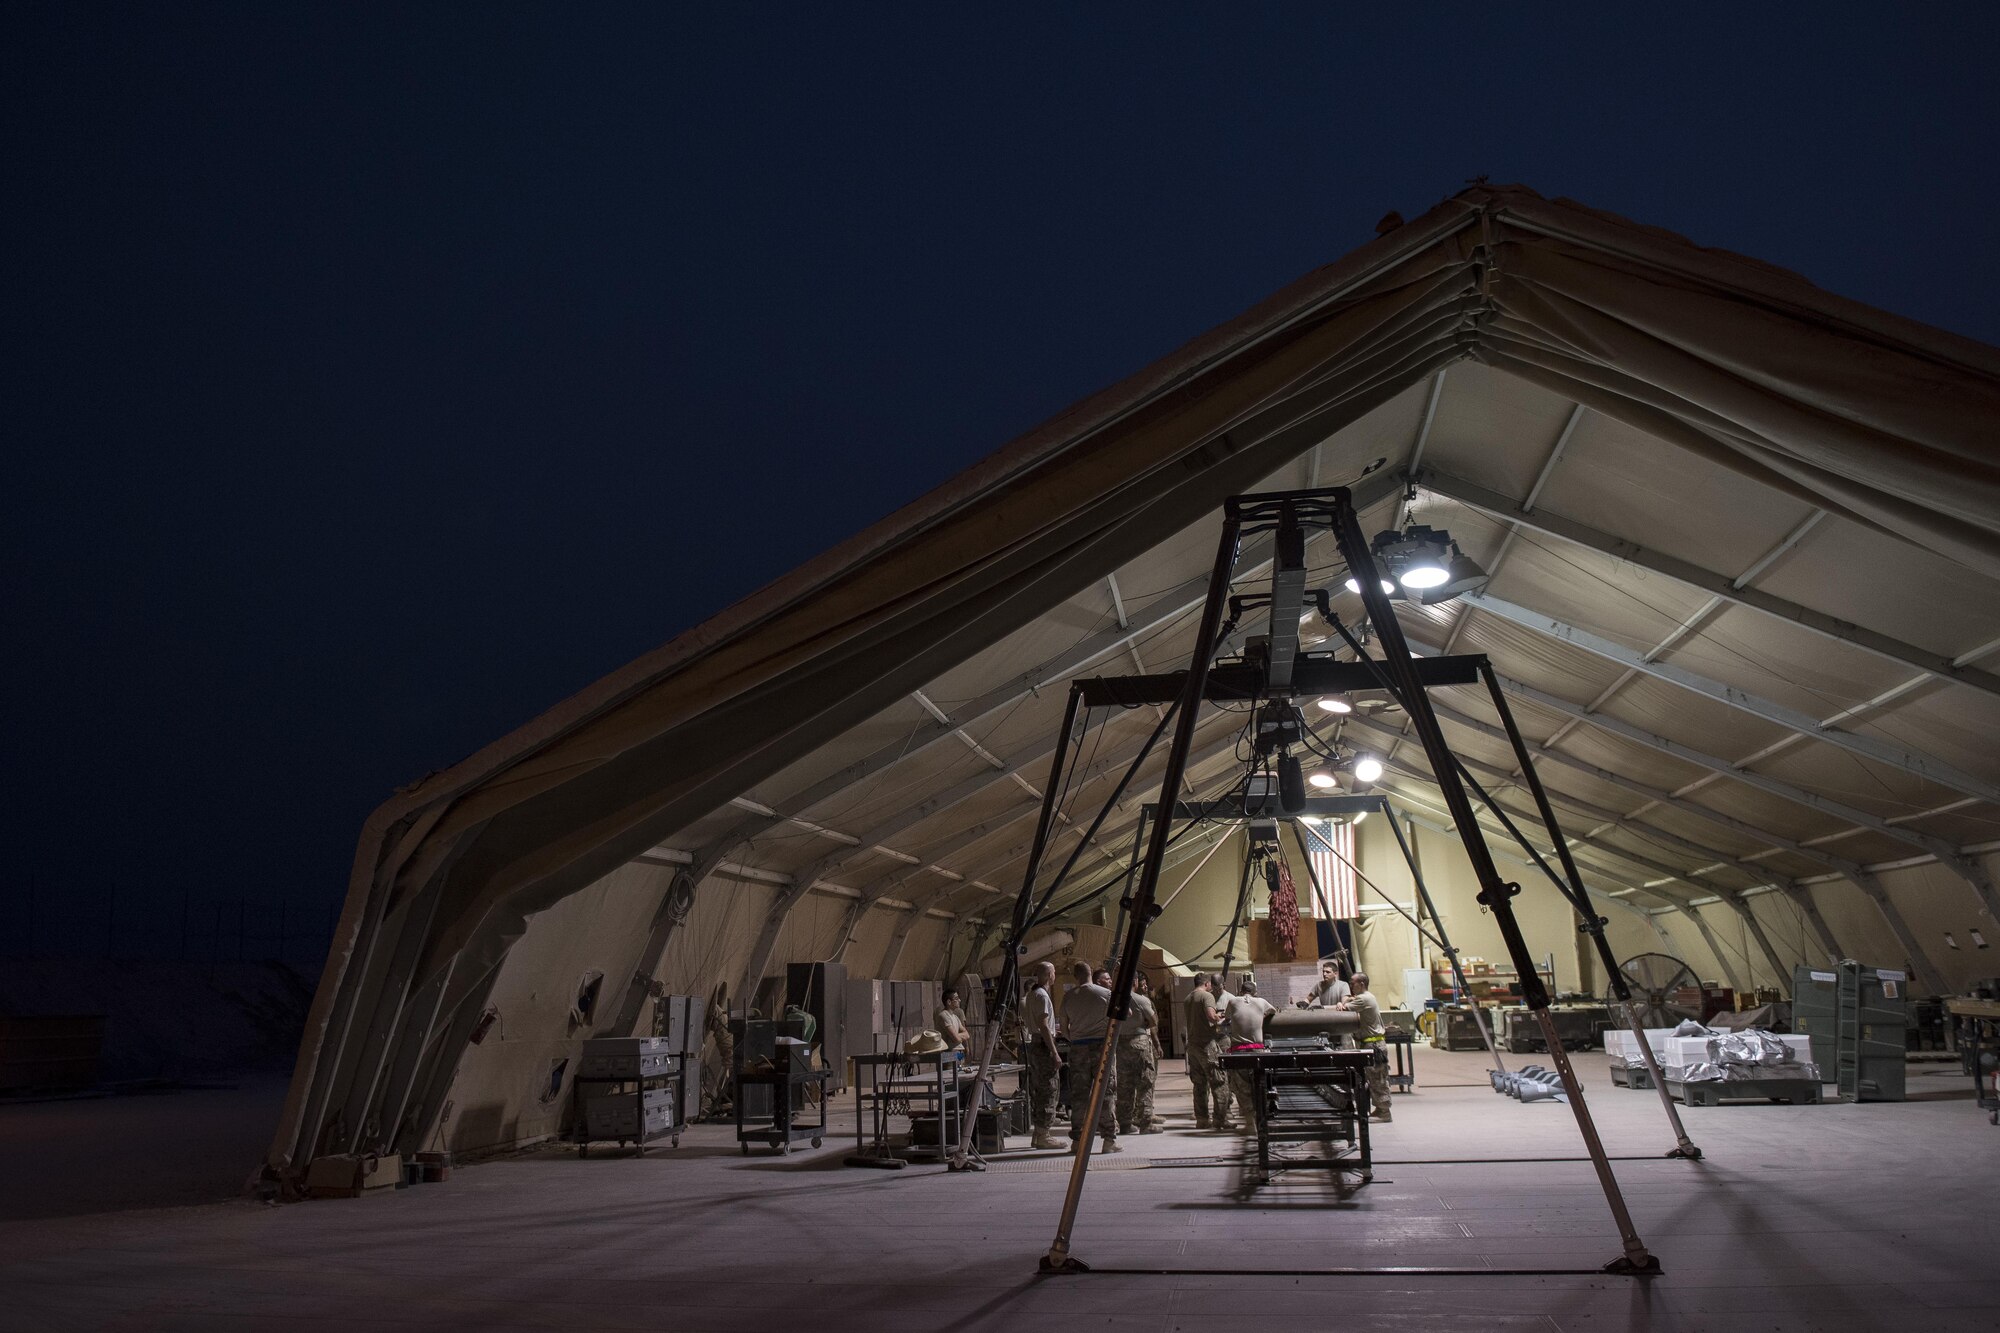 Airmen from the 332nd Expeditionary Maintenance Squadron build GBU-38s, July 12, 2017, in Southwest Asia. The squadron builds and maintains a variety of munitions to arm F-15E Strike Eagles and MQ-9 Reapers in support of Operation Inherent Resolve. (U.S. Air Force photo/Senior Airman Damon Kasberg)